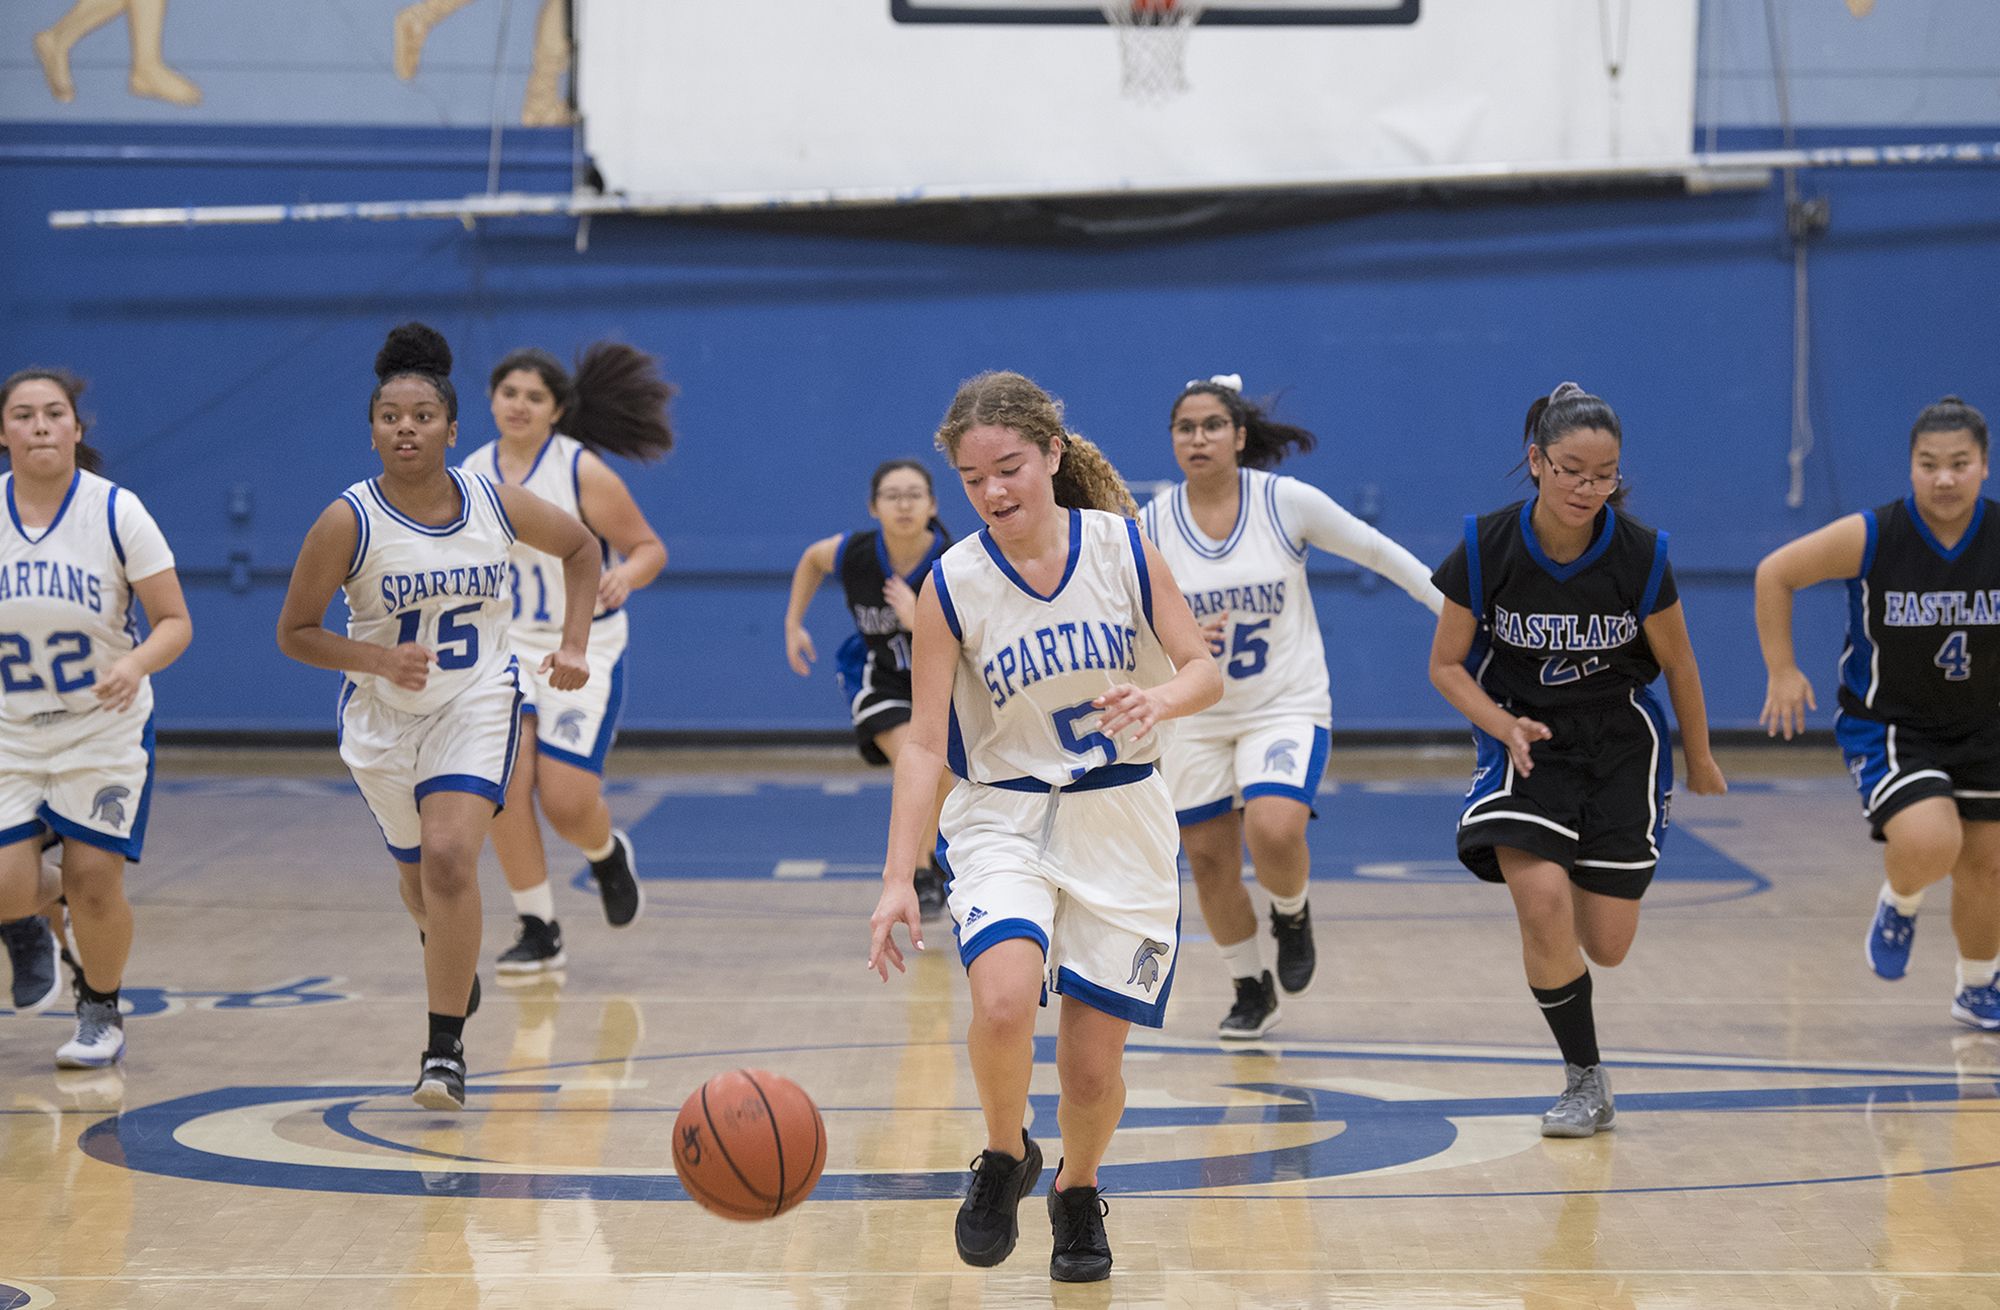 Kennedy Flores with ball, leads a fast break in the first half against Eastlake High School at Chula Vista High School on Nov. 27. Kennedy is one of the captains on the novice girls’ basketball team. Image by Amanda Cowan. United States, 2019.